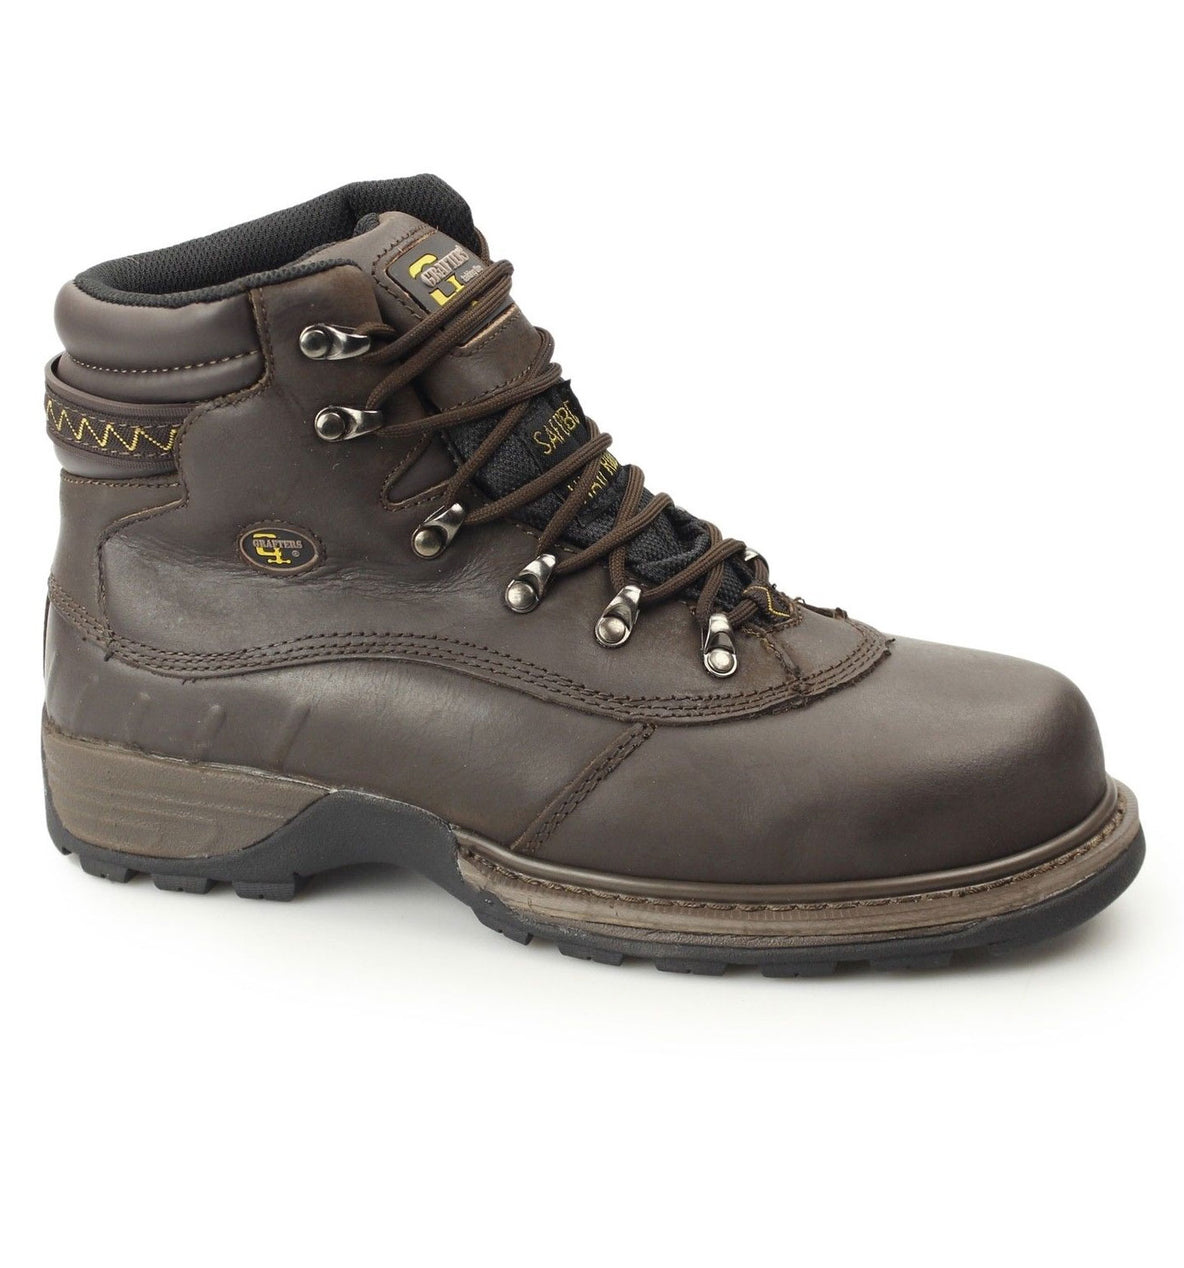 Grafters® Waterproof Safety Boot M139B Steel toe brown waxy leather